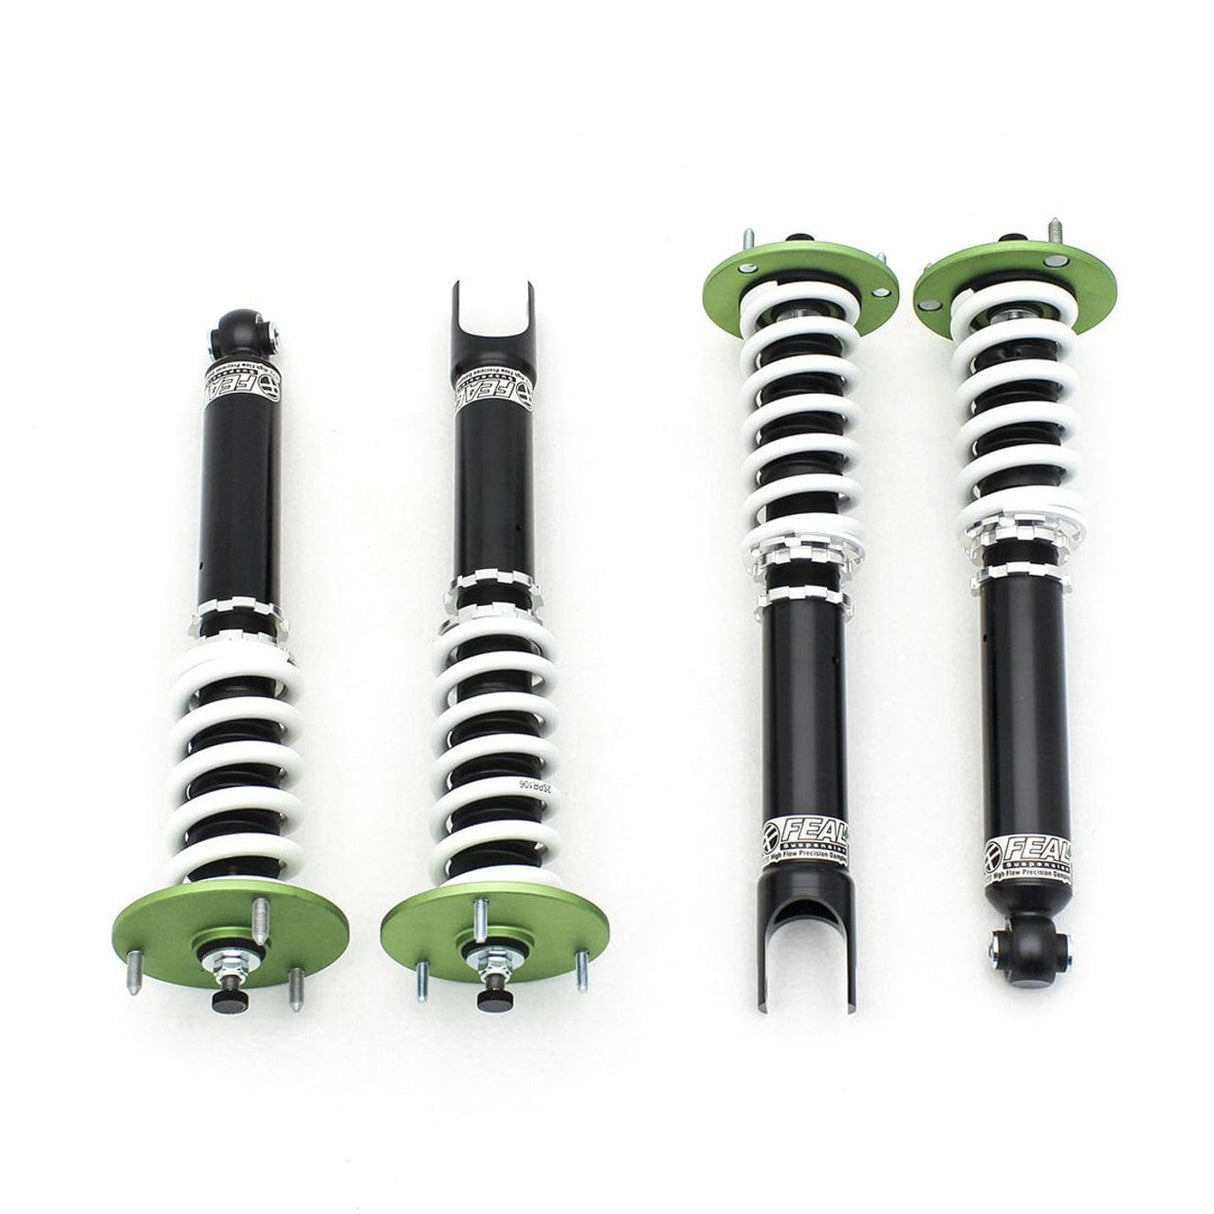 Feal 441 Coilovers - 2001-2005 Honda Civic (EP3)